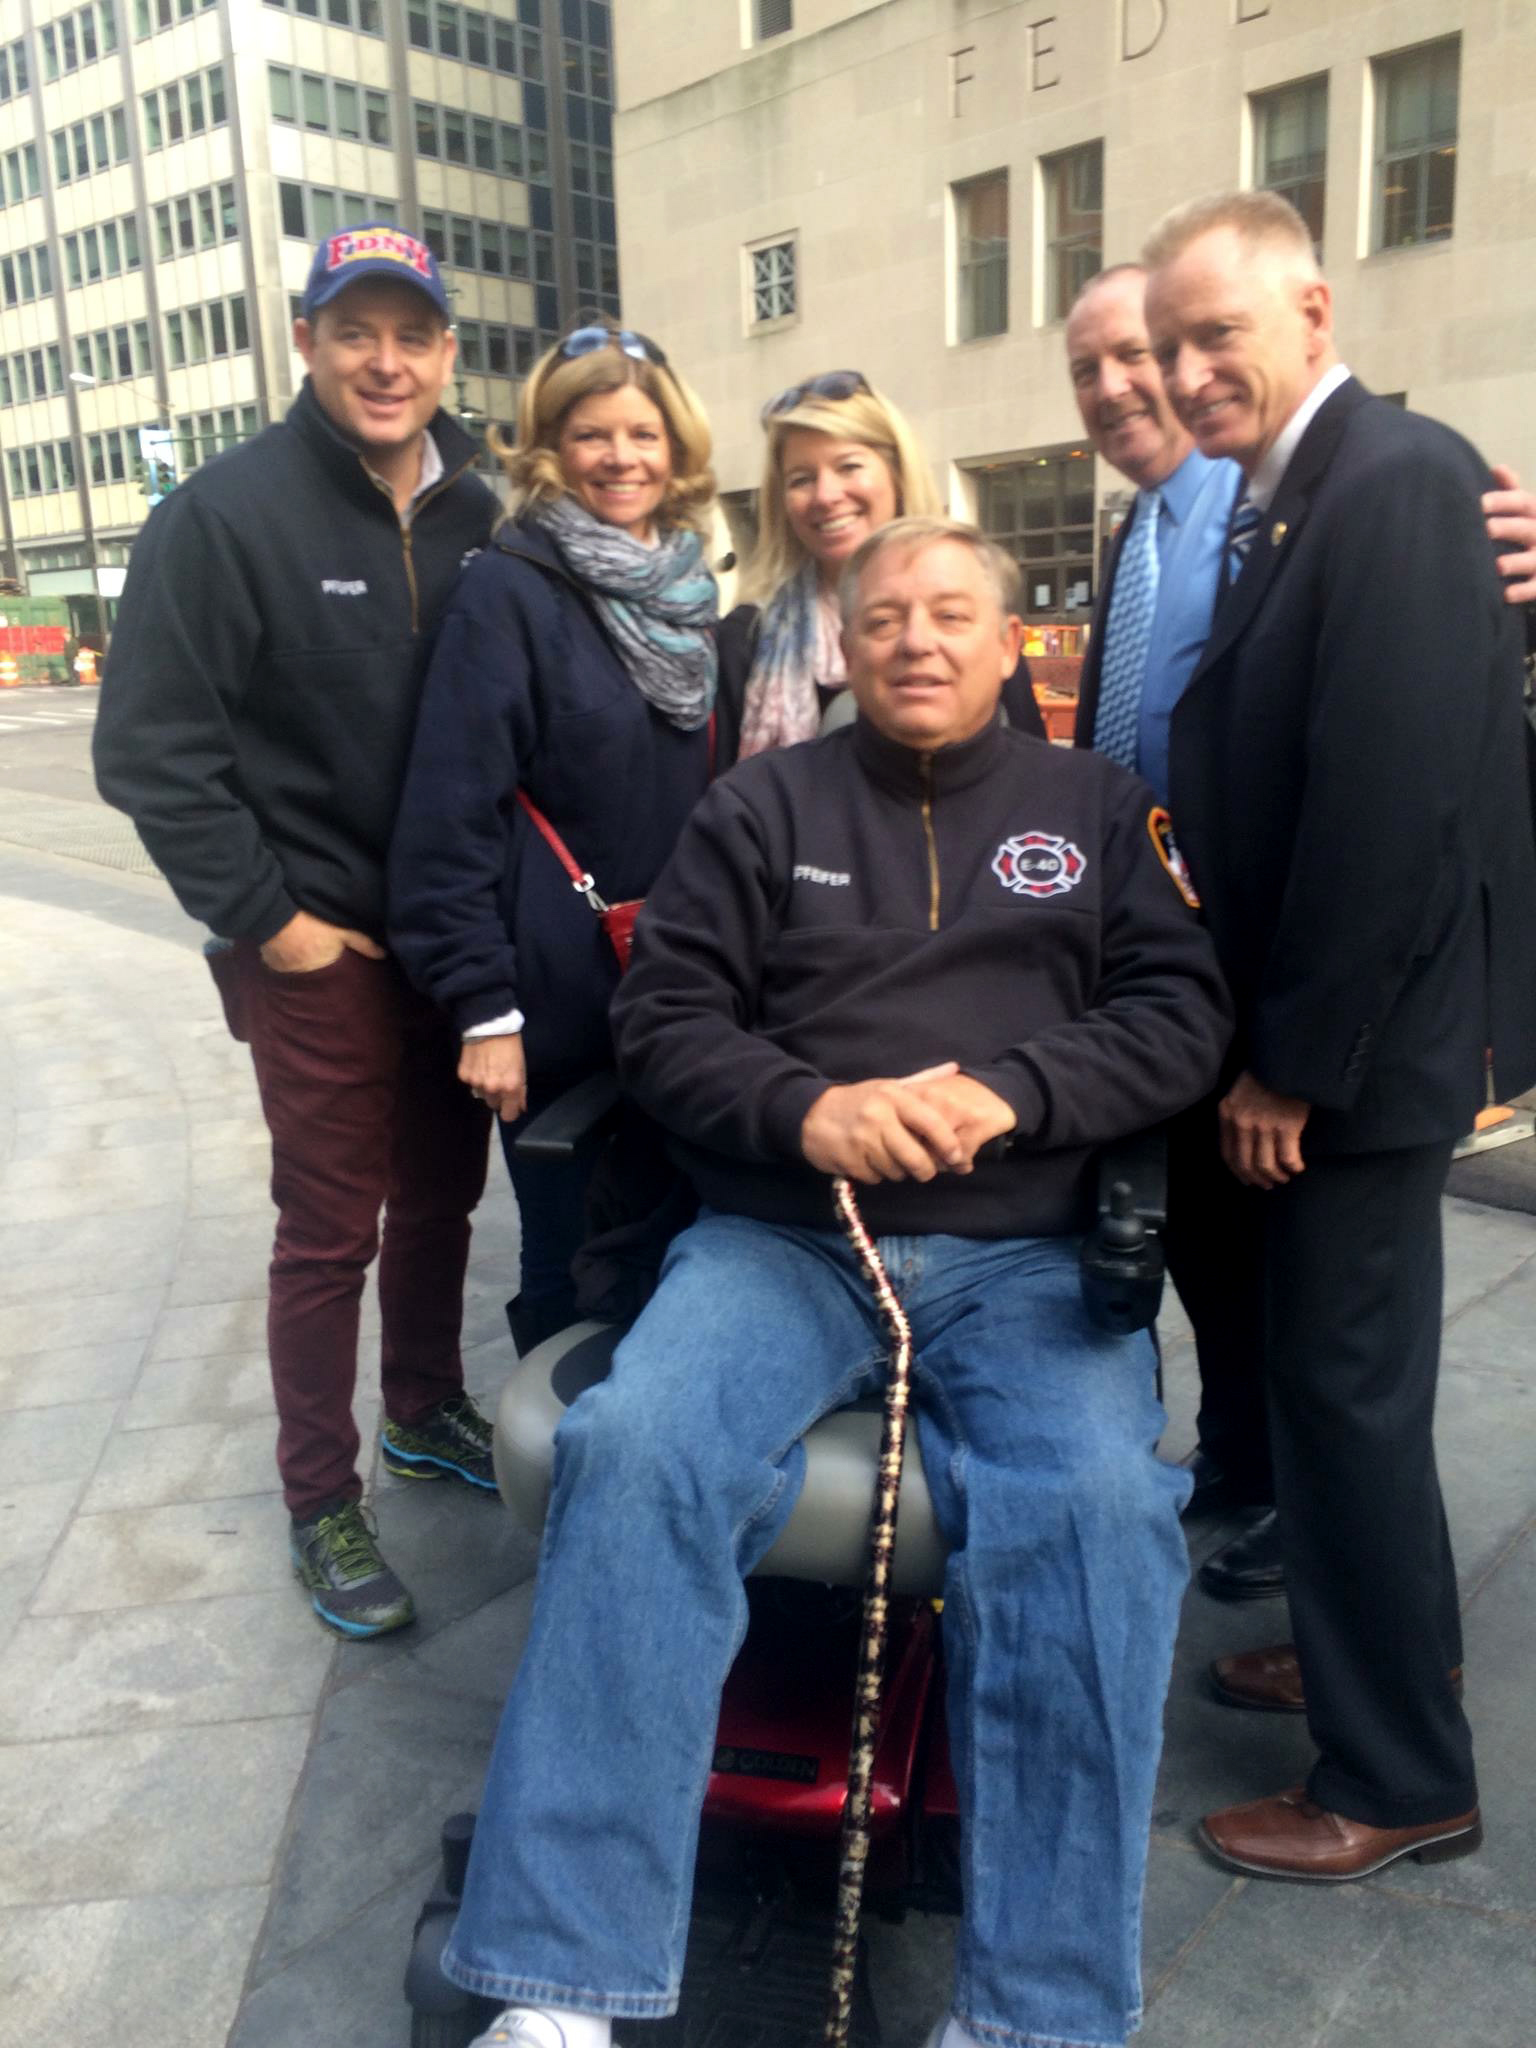 PHOTO: Ray Pfeifer stayed at the World Trade Center site for months after the 9/11 attacks to help with the clean up